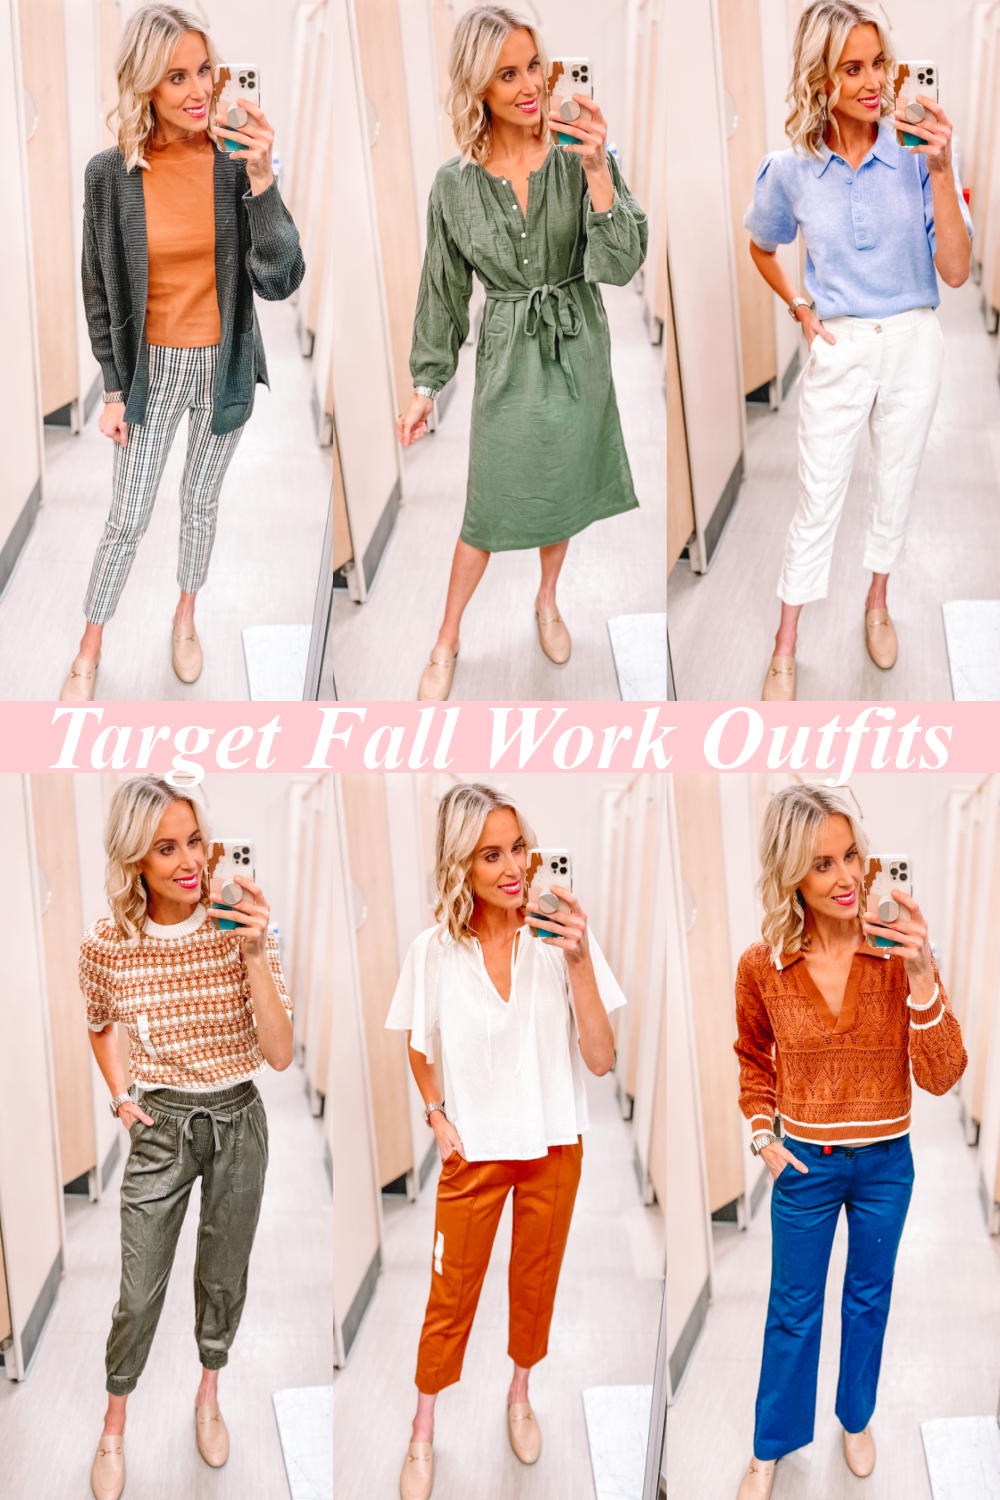 https://www.straightastyleblog.com/wp-content/uploads/2022/08/Target-fall-work-outfits-regular-pin.png